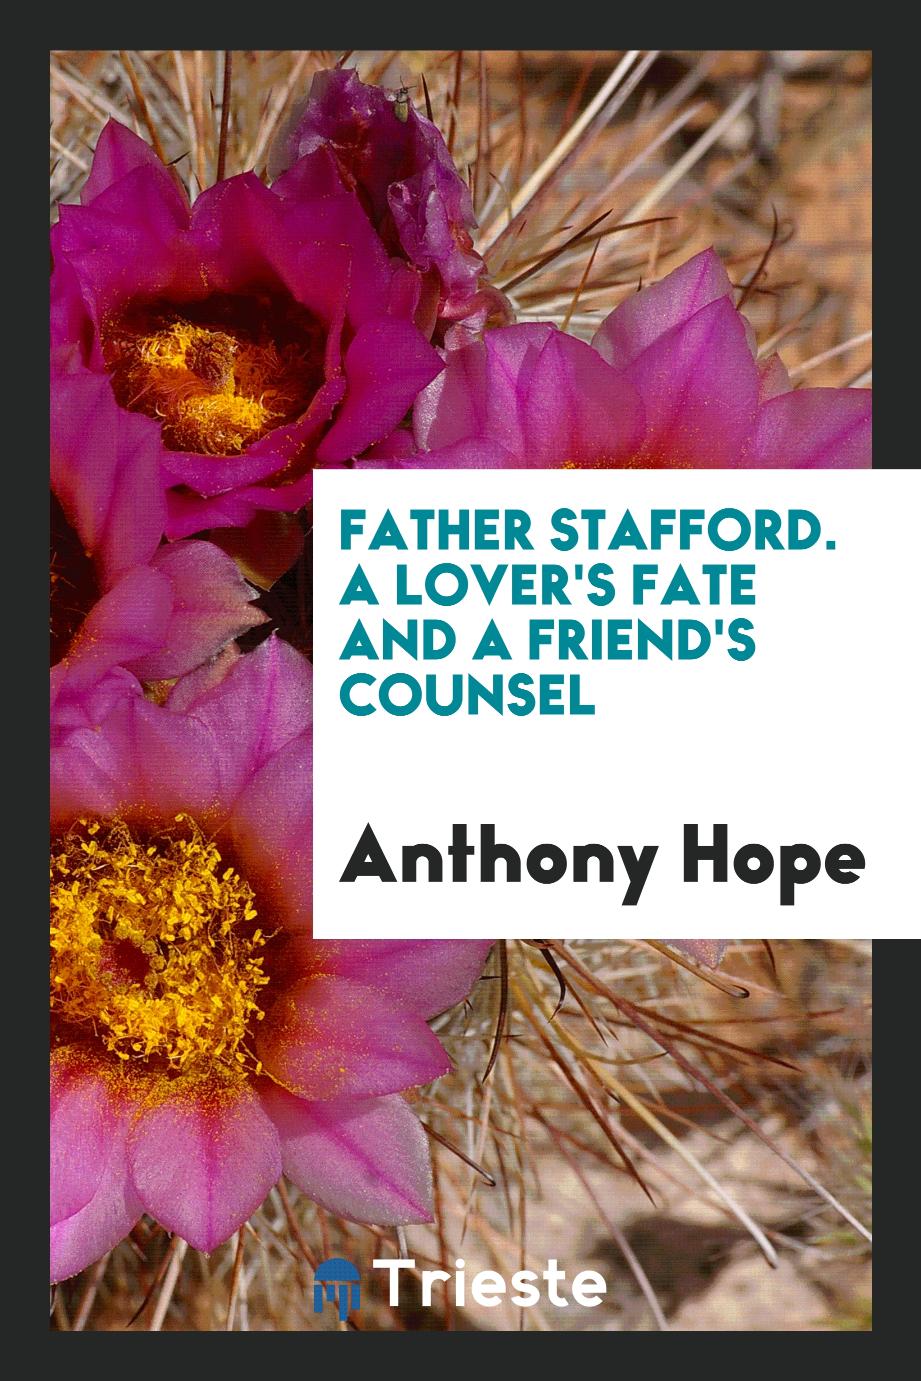 Father Stafford. A Lover's Fate and a Friend's Counsel